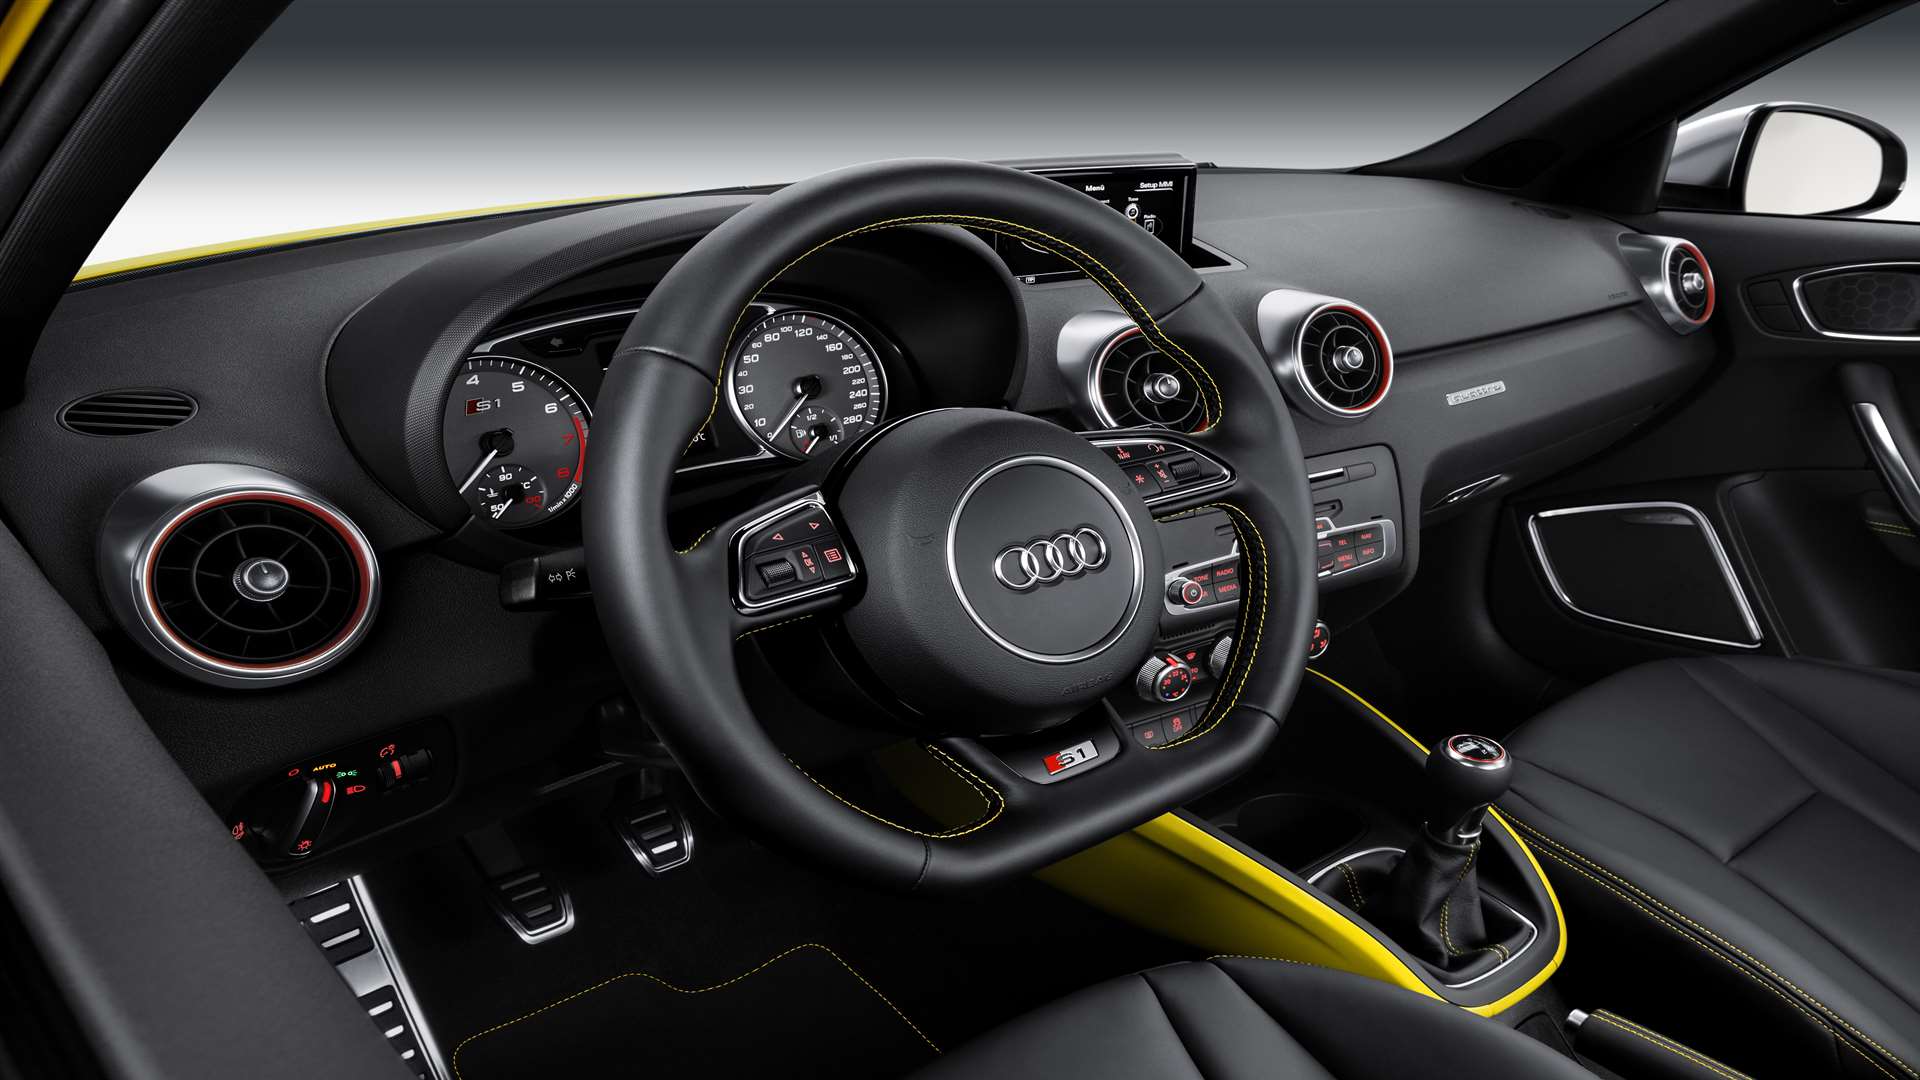 The interior is typical Audi